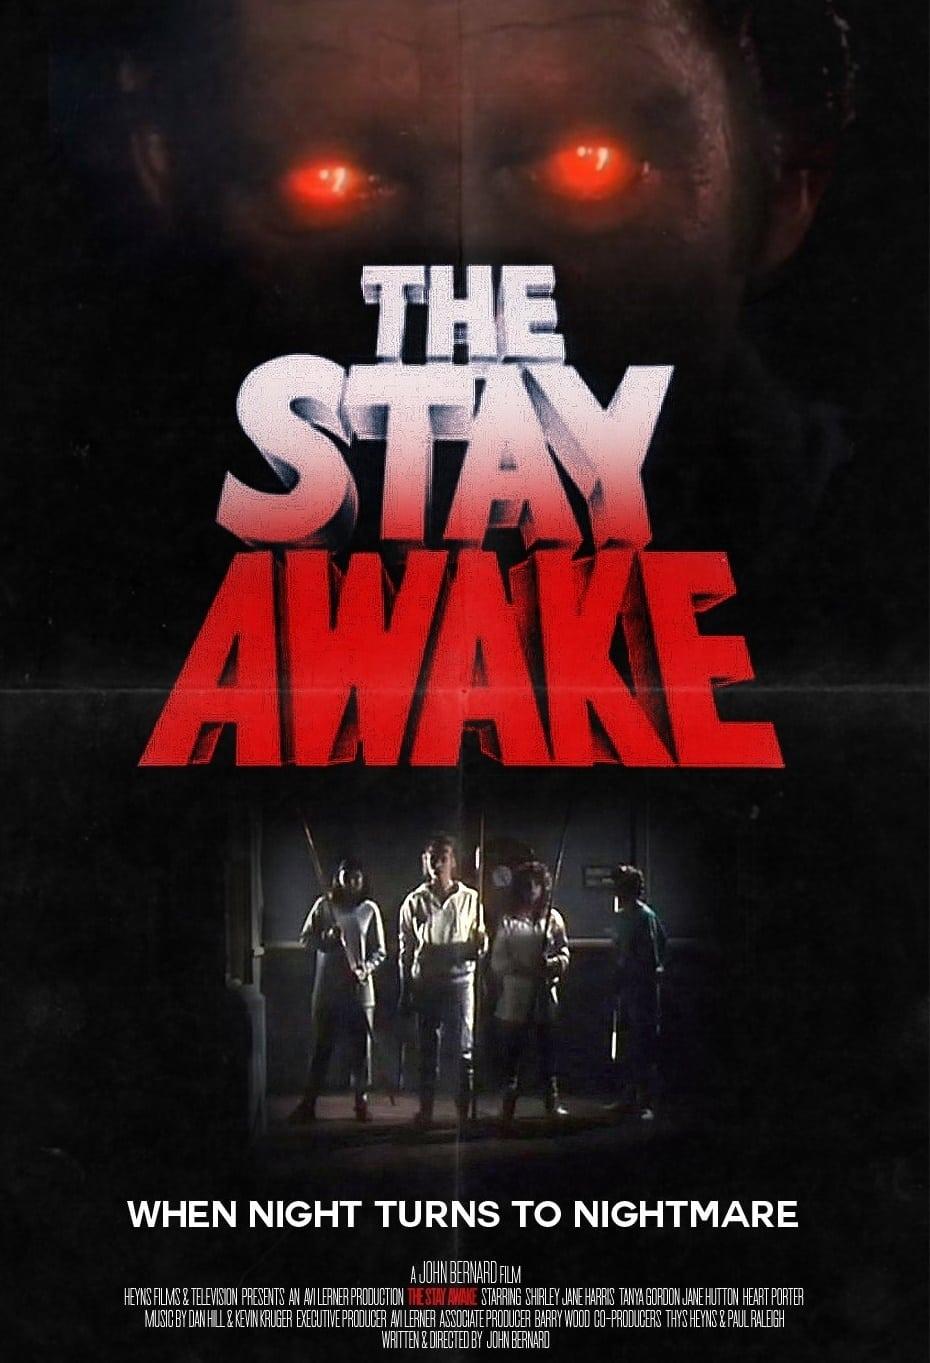 The Stay Awake poster